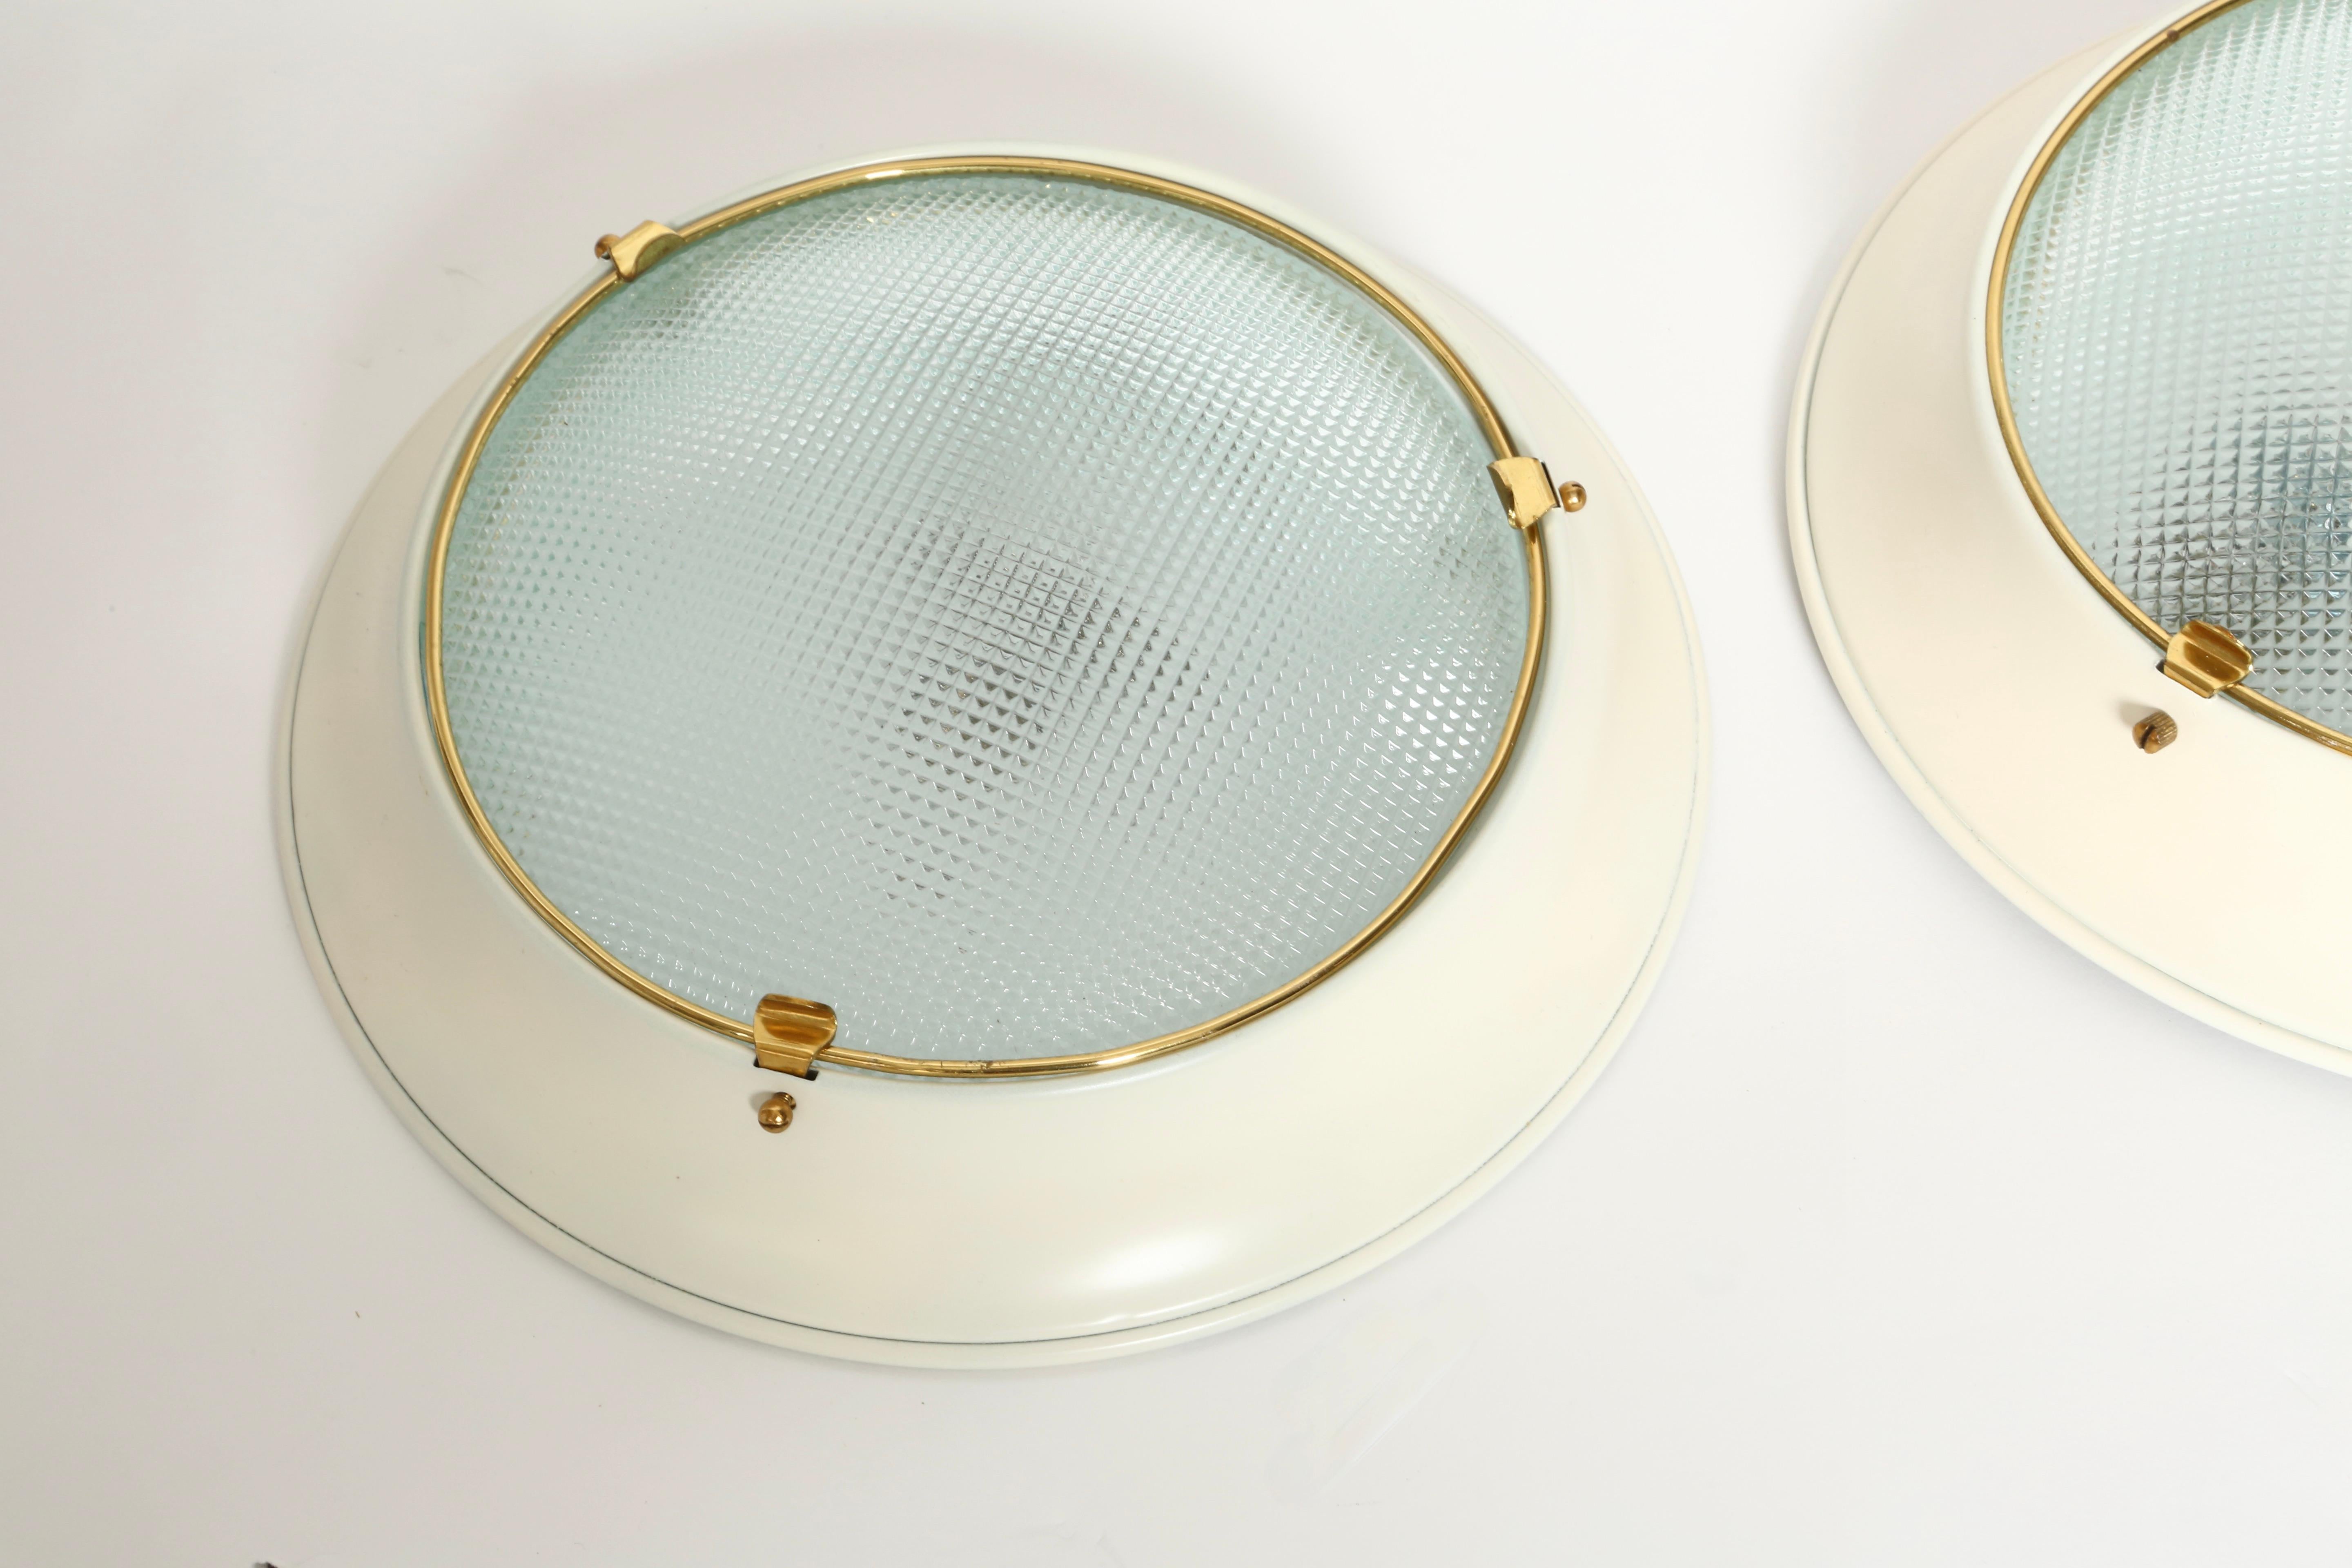 Stilnovo style flush mount wall or ceiling lights.
Glass, brass, enameled metal.
One medium base socket each.
Rewired for US.
Price is for one light.
8 lights are available.

We take pride in bringing vintage fixtures to their full glory again.
At